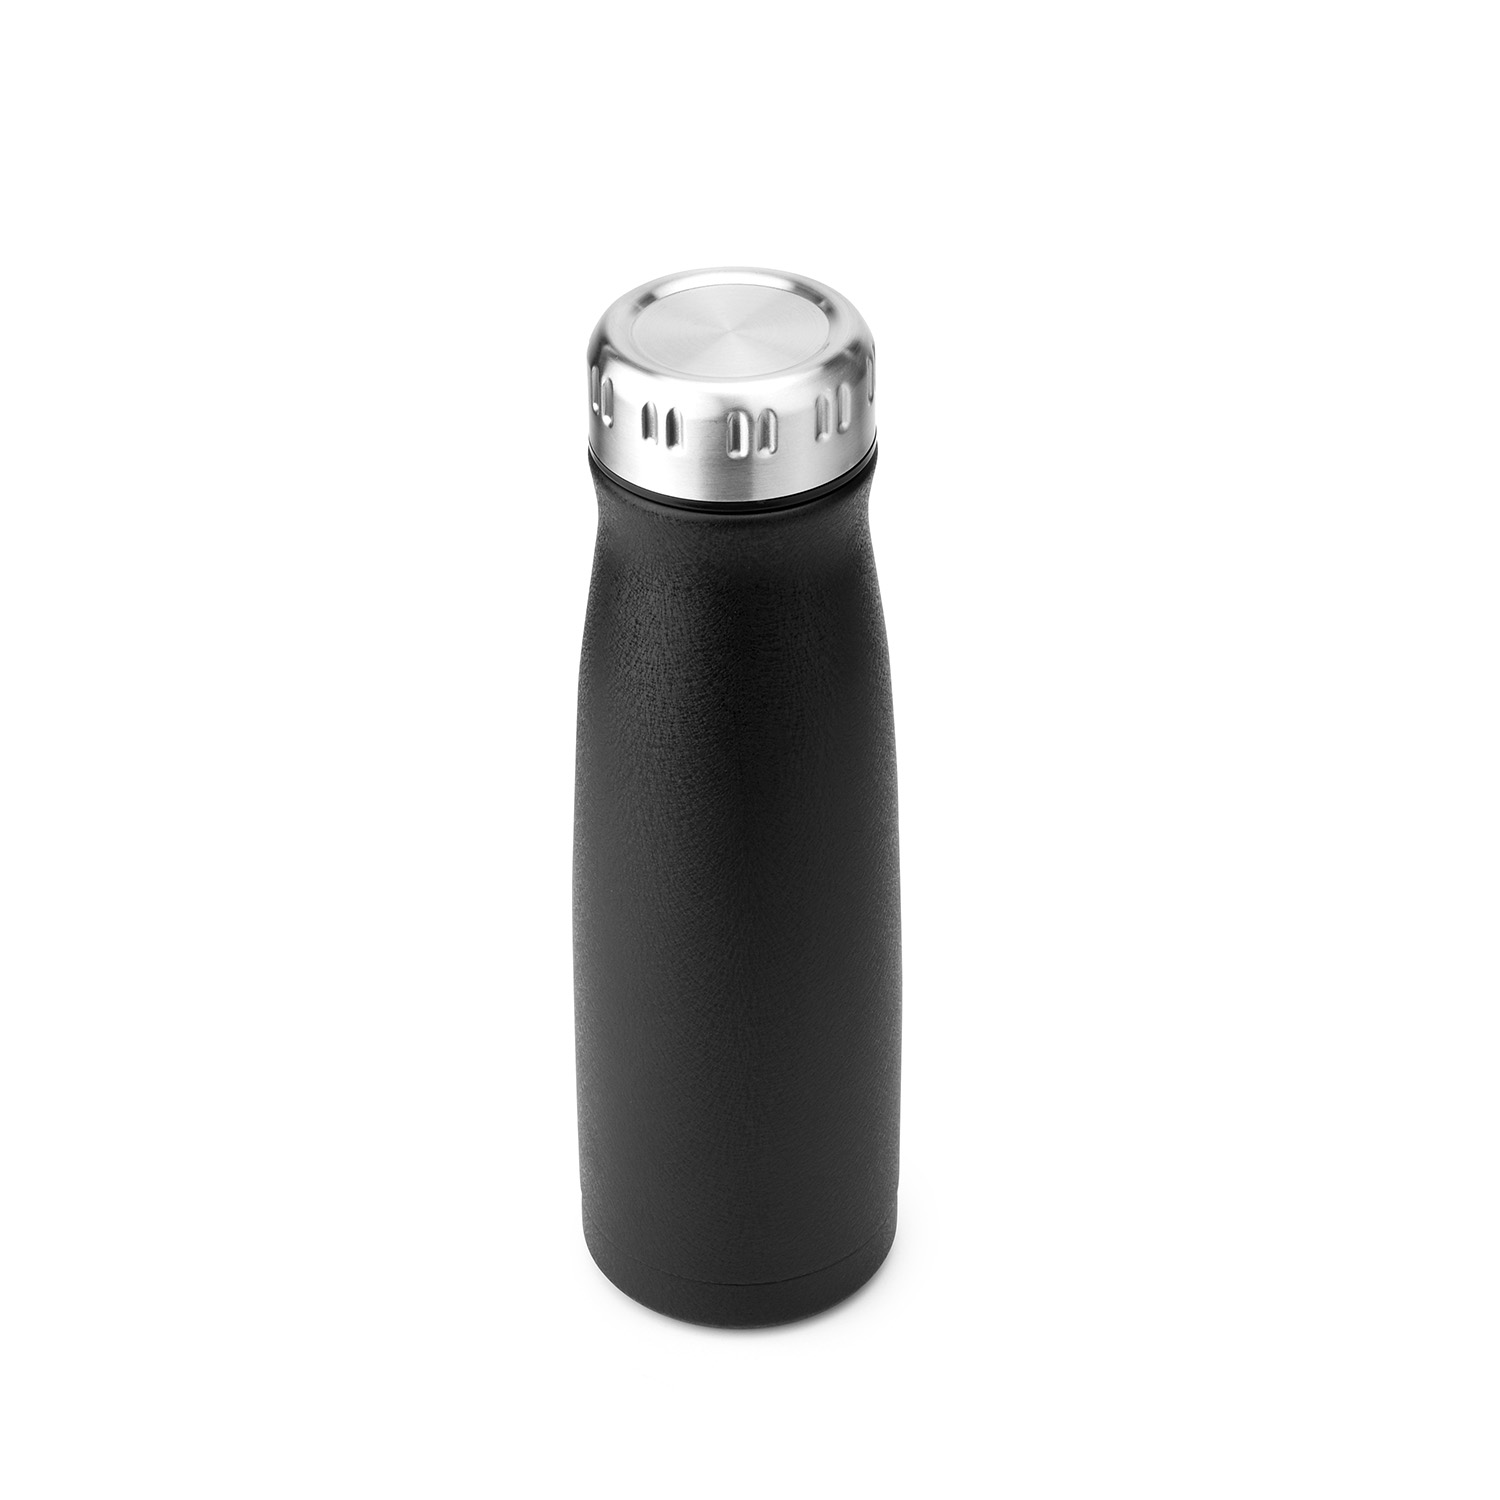 https://www.waterbottle.tech/wp-content/uploads/2019/08/thermos-stainless-steel-cola-shaped-water-bottle-s12500a3-2.jpg